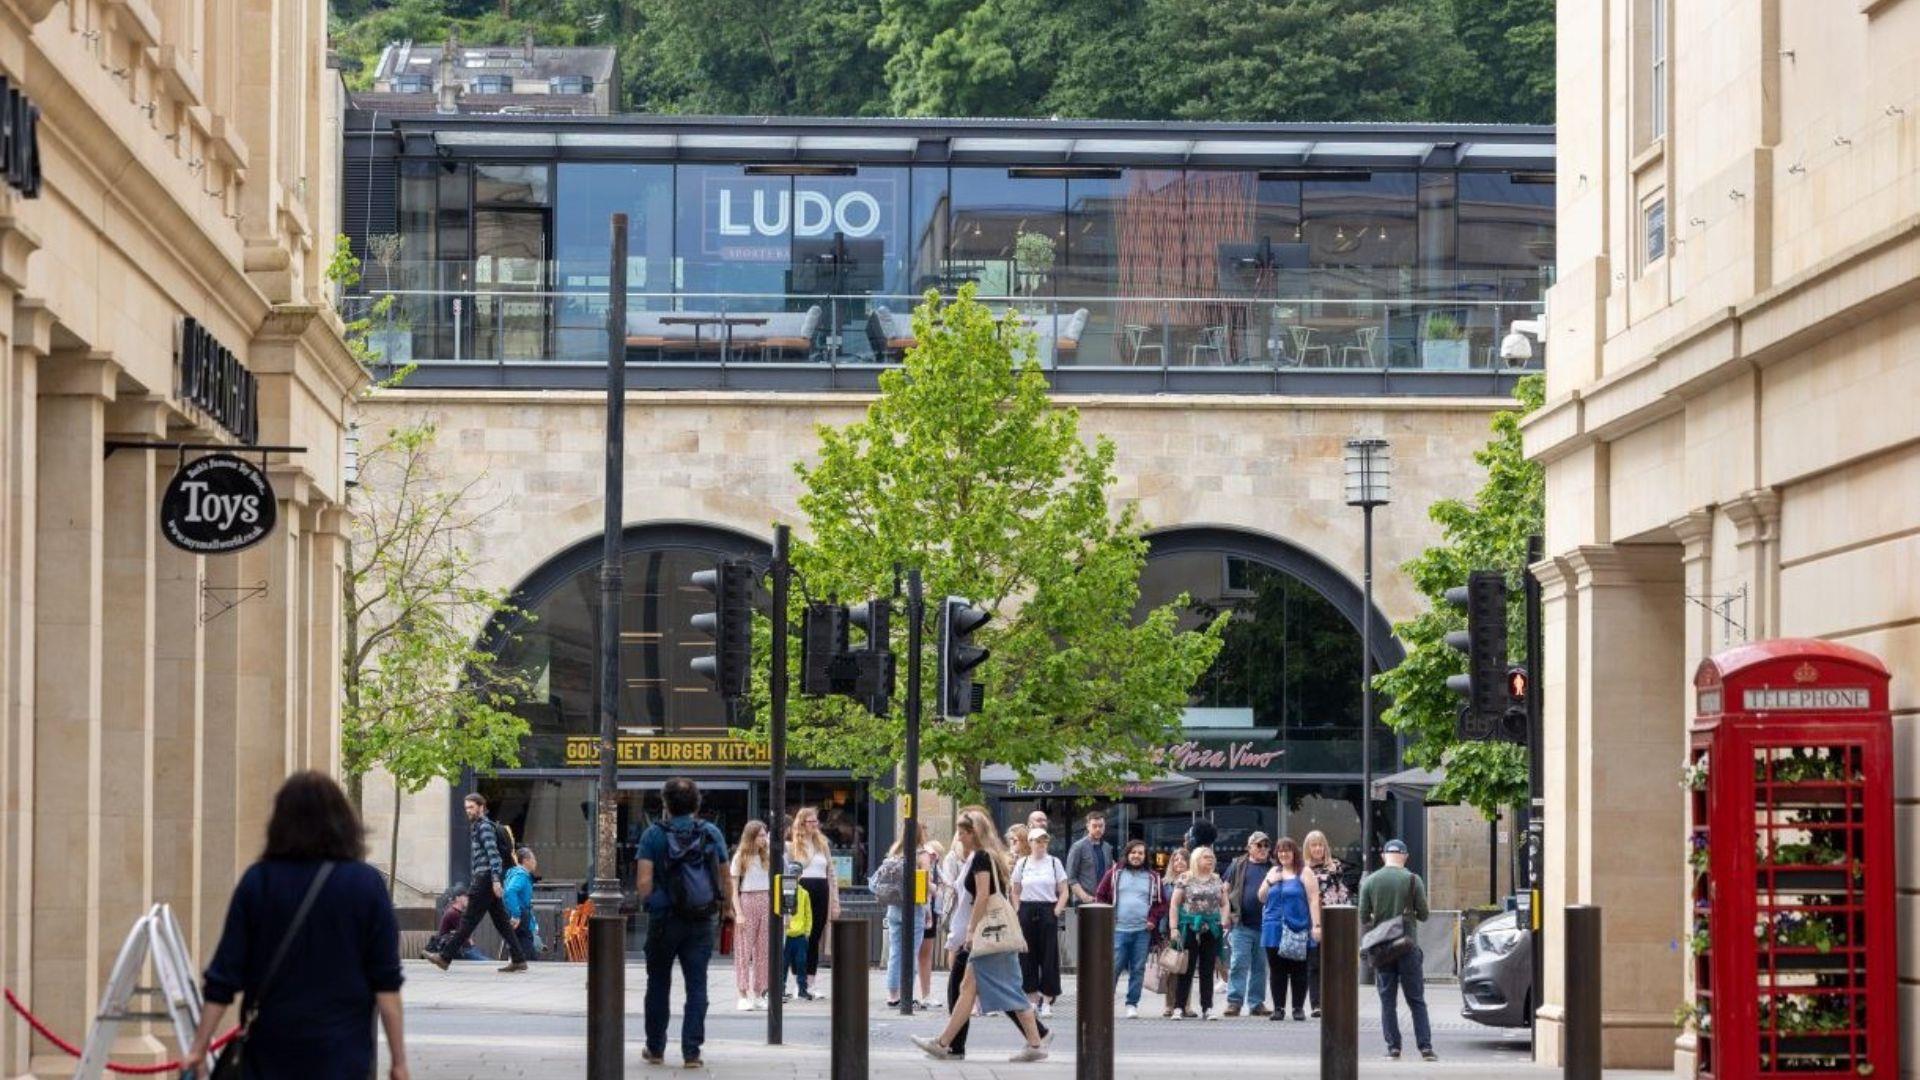 SouthGate Bath - Street looking to Ludo